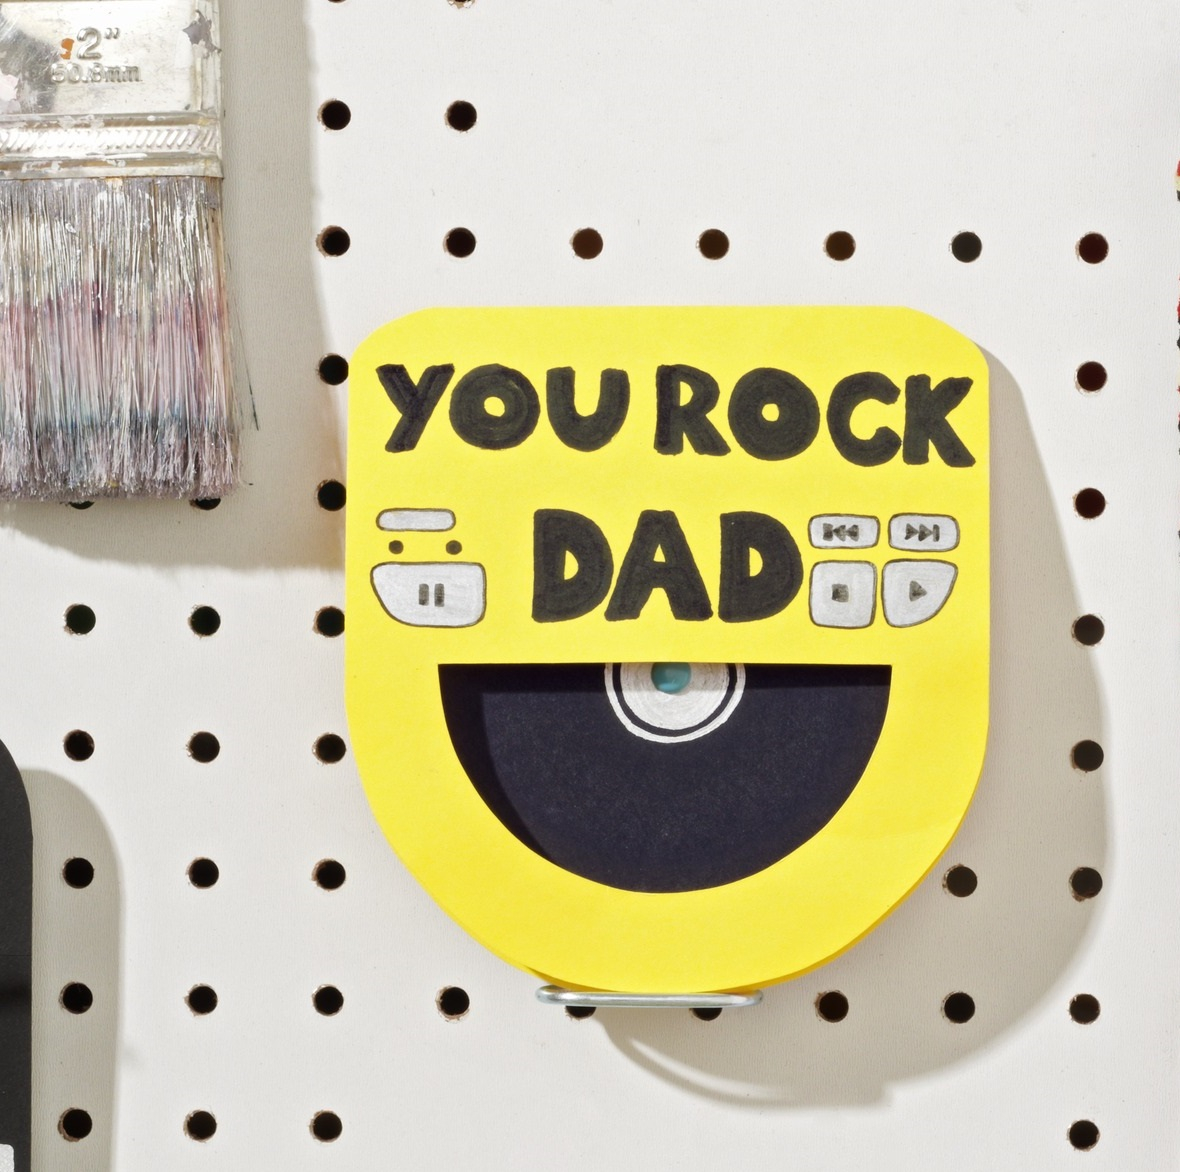 Dad Birthday Card Ideas Funny Dad Birthday Cards From Daughter Homemade Father S Day